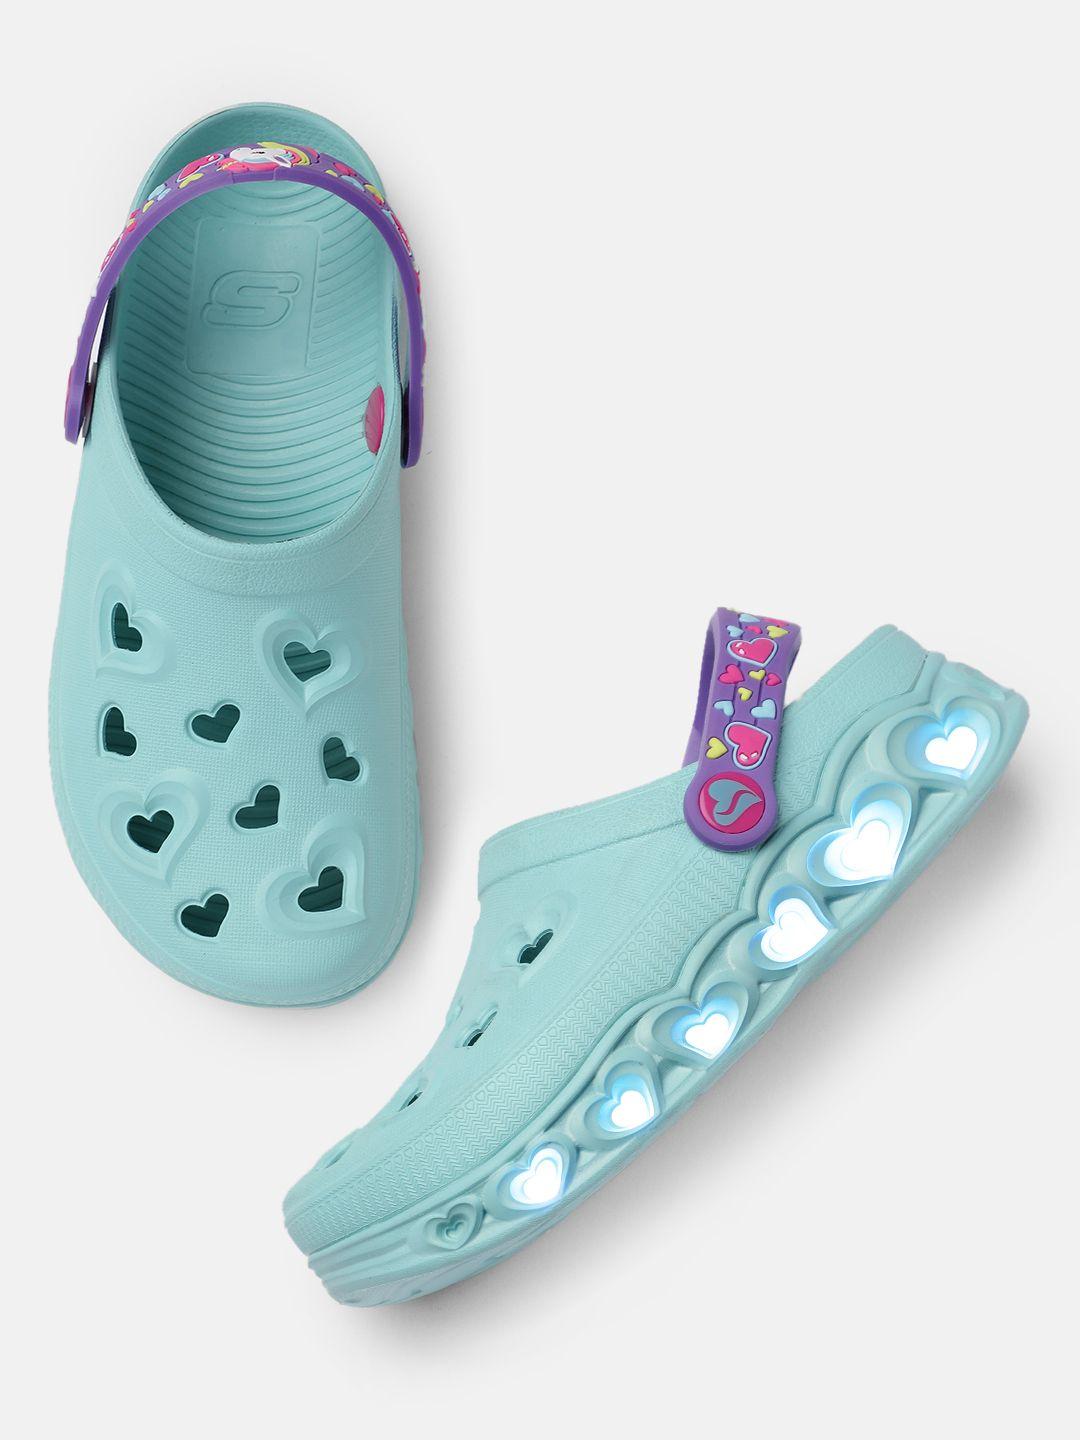 skechers-girls-turquoise-blue-solid-hearted-unicorns-&-suns-clogs